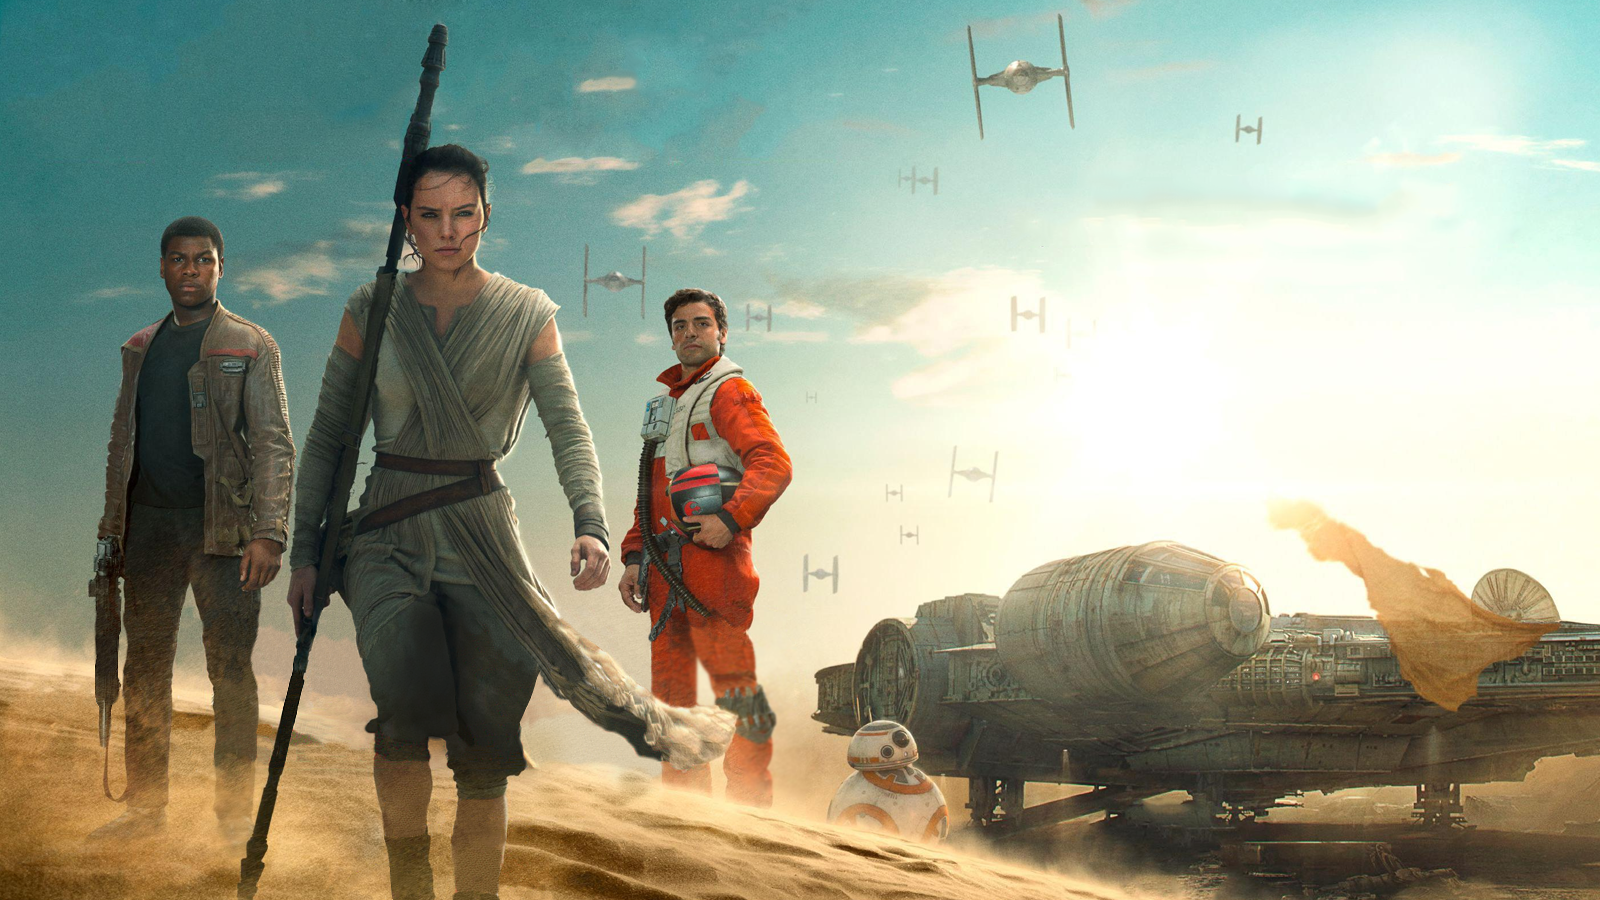  The Force Awakens HD Wallpaper Finn Rey and Poe   Cool Wallpapers